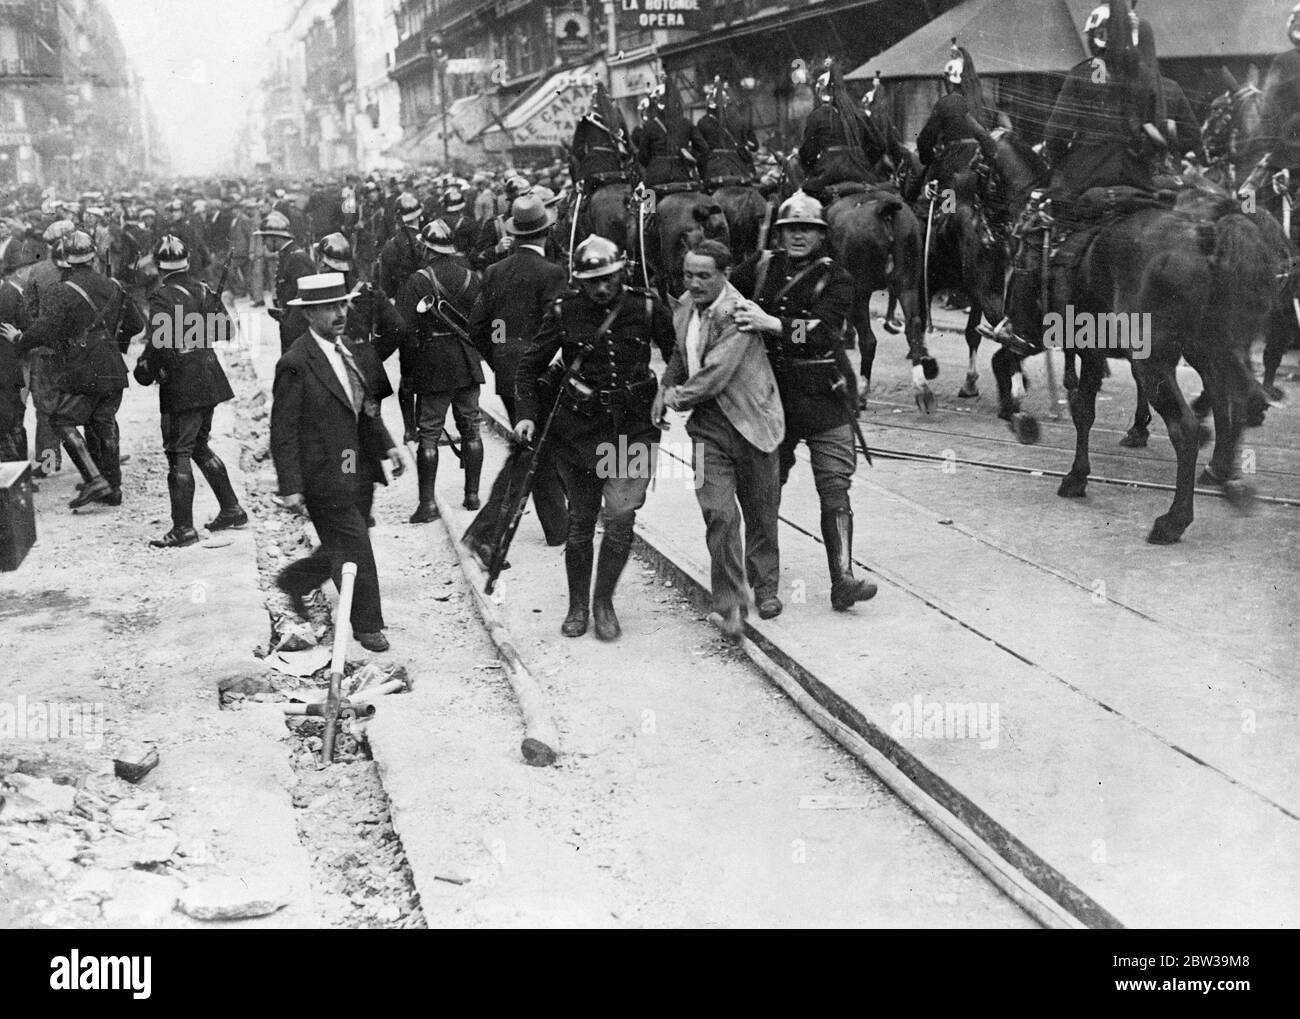 More than a thousand arrests in Paris anti wage cut riots - police in fierce battles with demonstrators . A demonstrator being led away by Mobile Guards in the Rue Lafayette , as mounted troops charge the crowd in background . 20 July 1935 Stock Photo